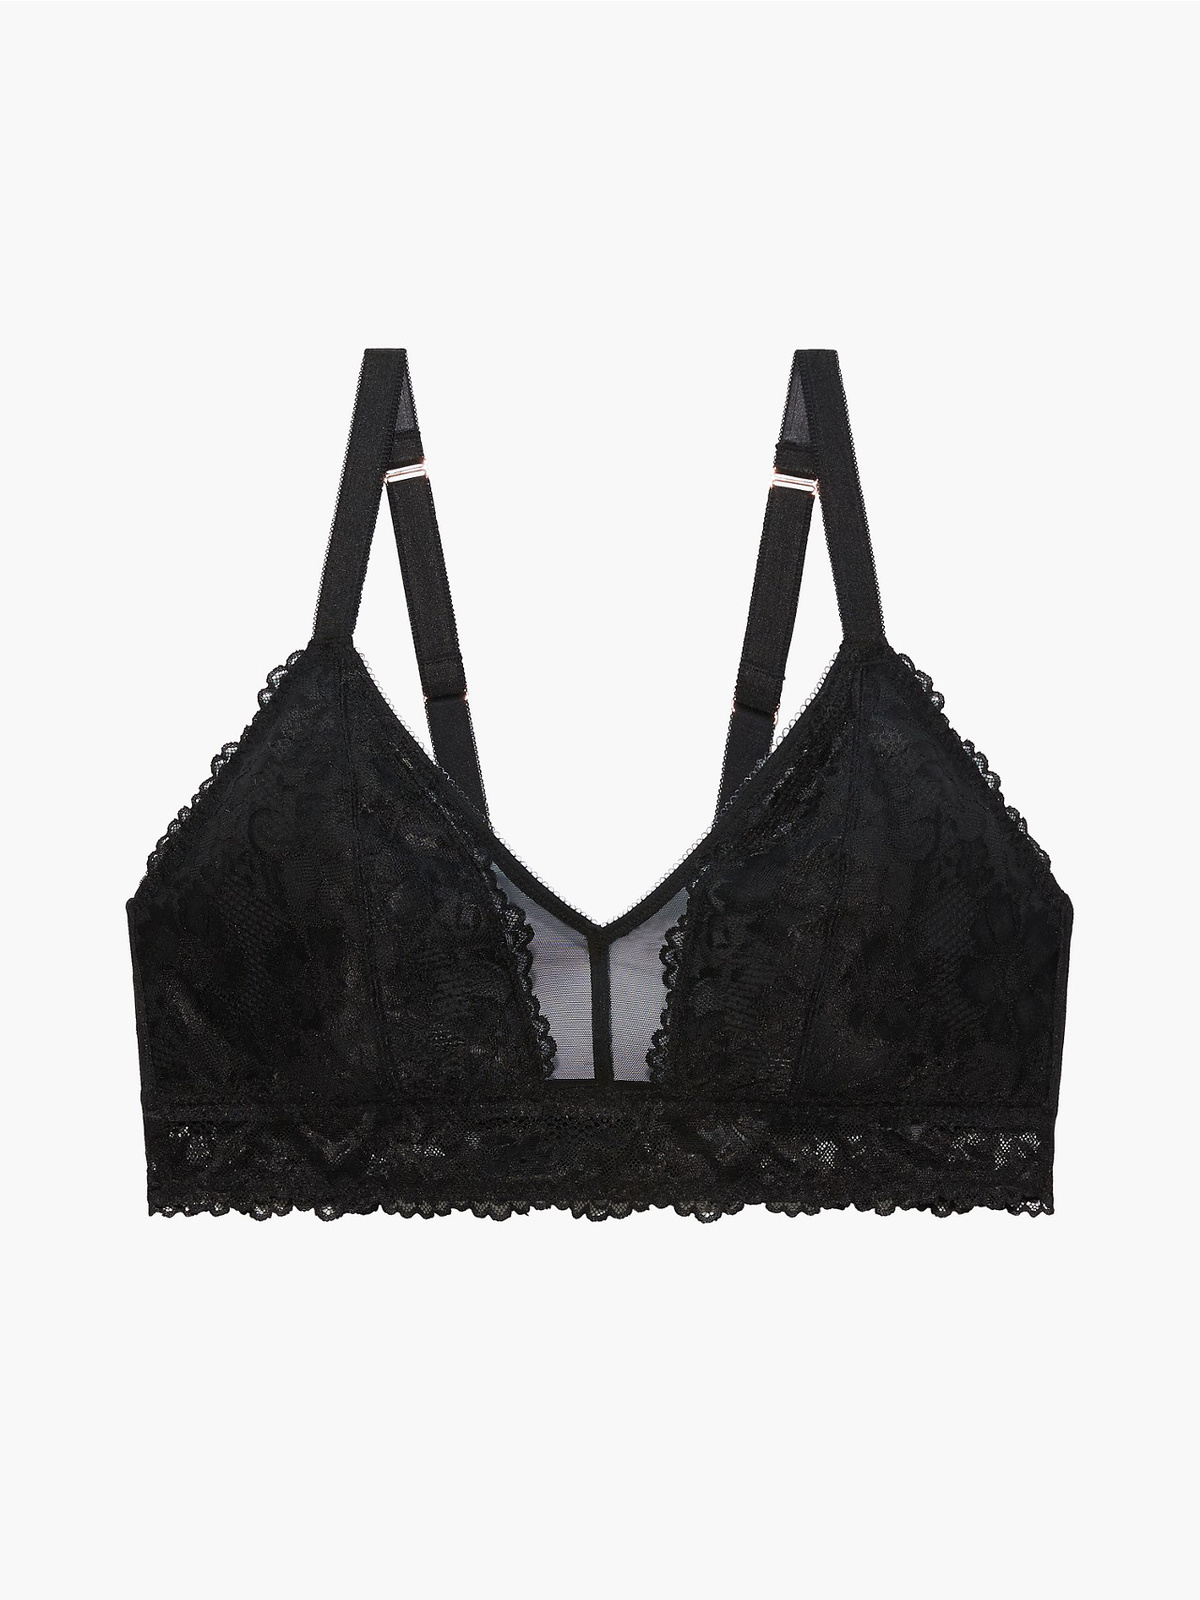 NWT $48 Free People Alia Bralette Black Combo Floral Lace, Sz Small